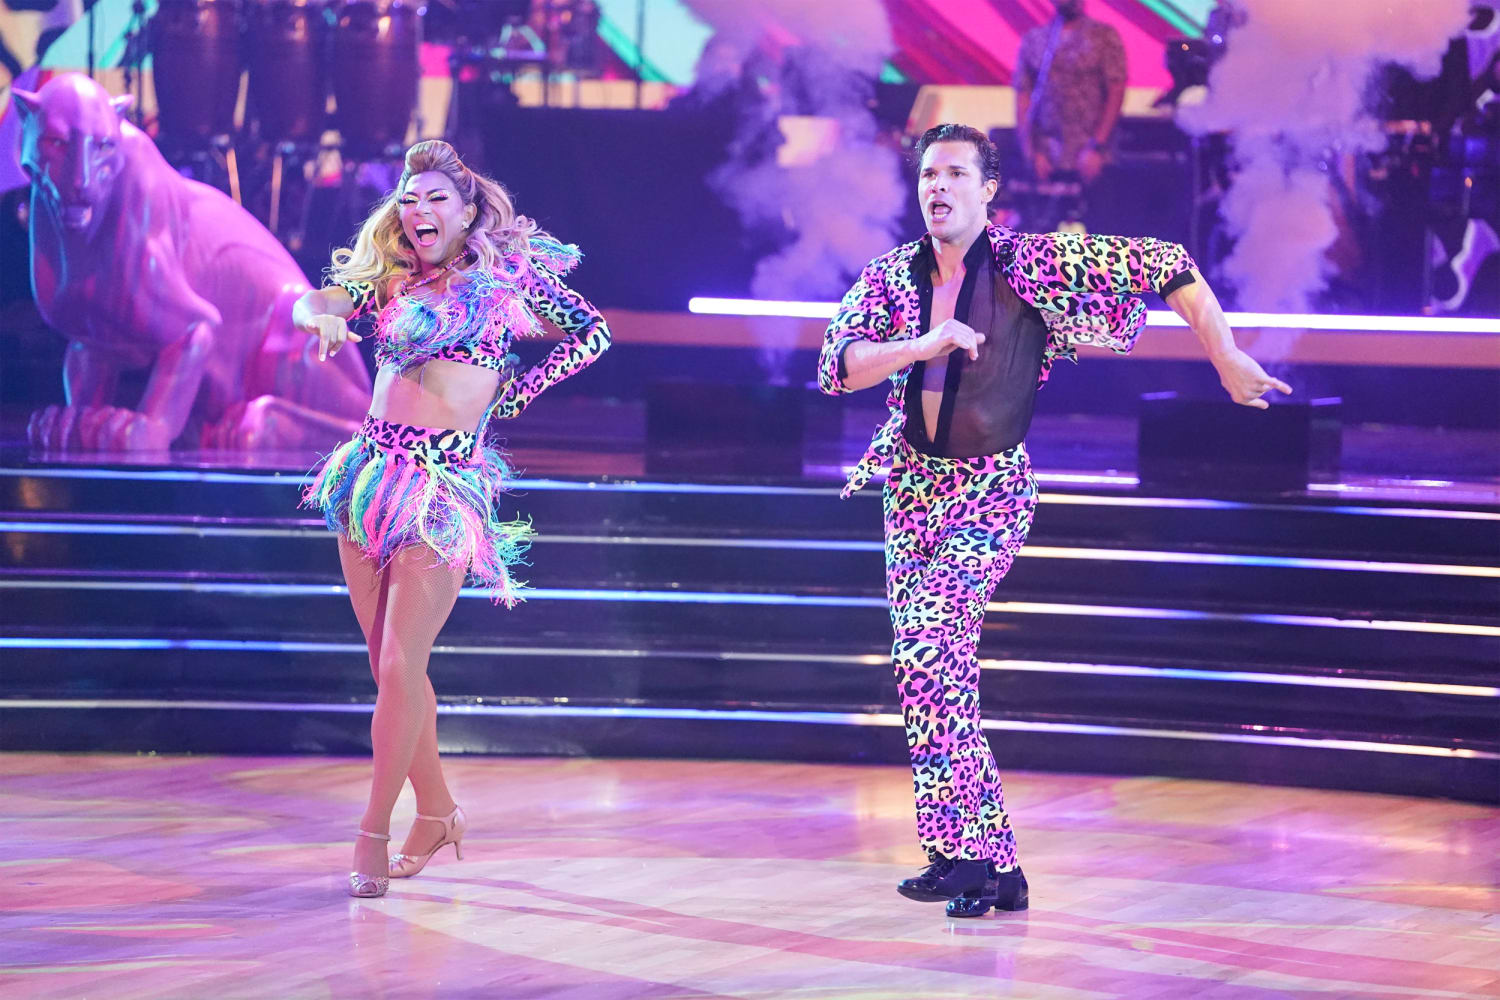 Drag performer Shangela makes Dancing With the Stars history photo